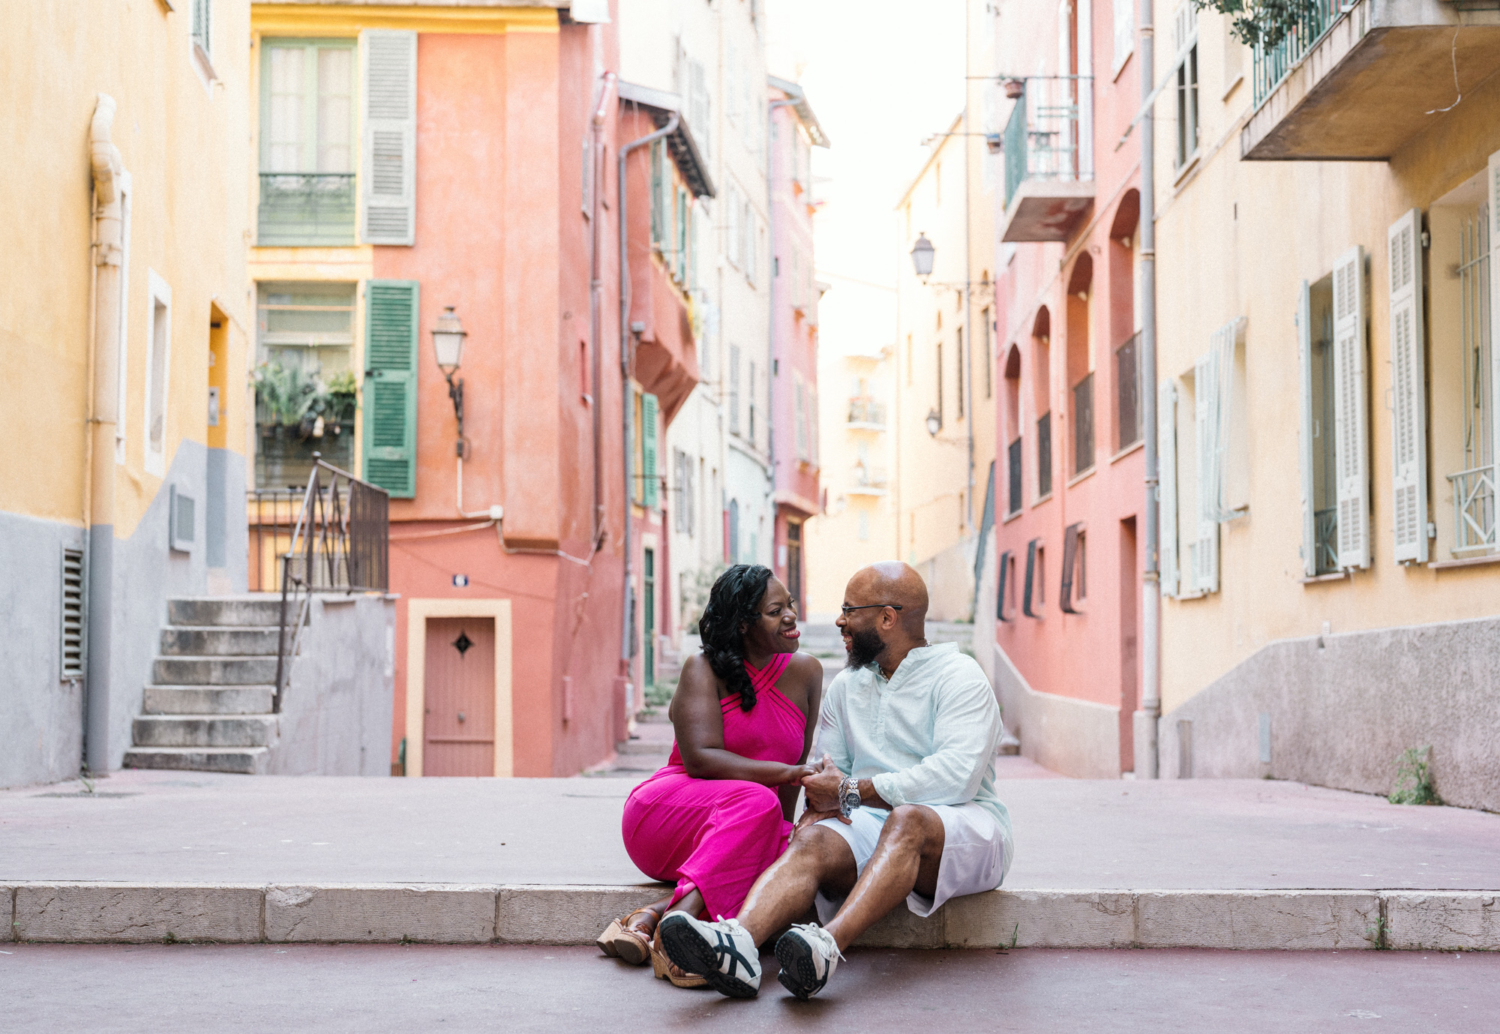 couple share a laugh in colorful neighborhood in nice france